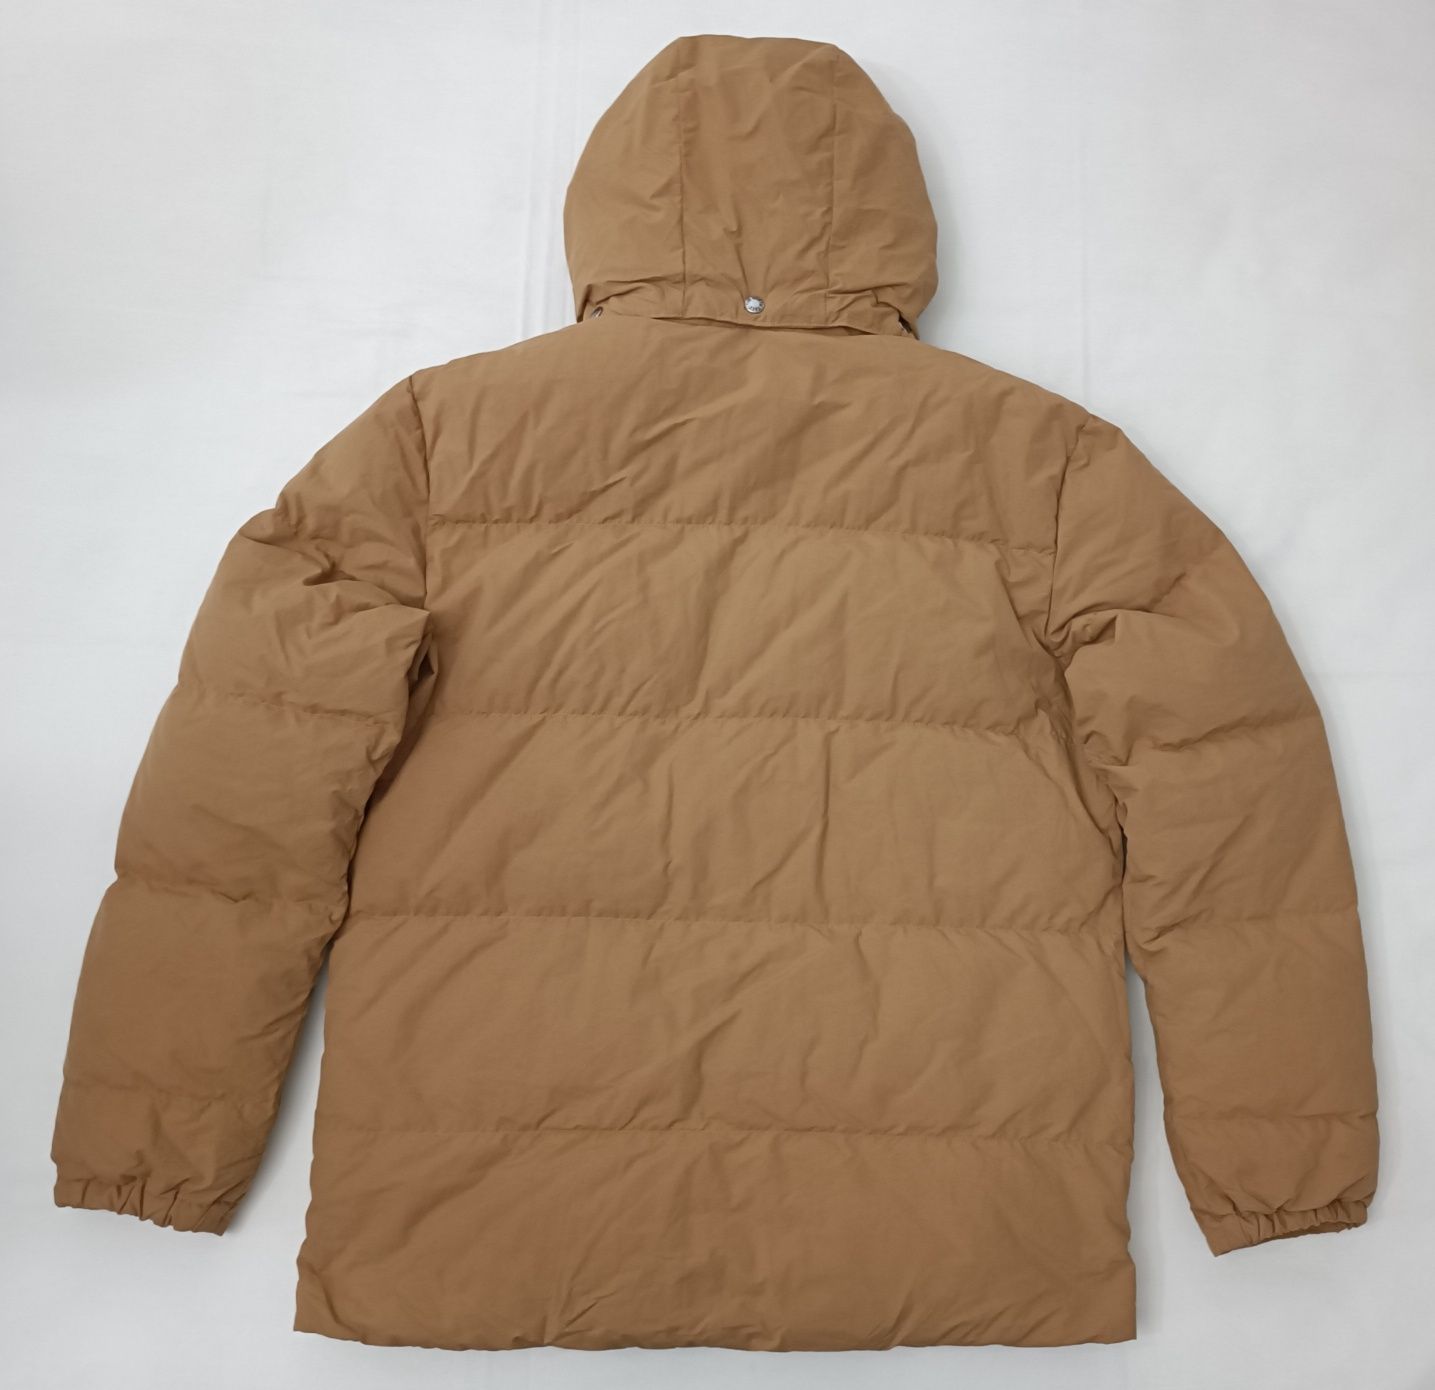 The North Face Puffer 600 Down Jacket оригинално пухено зимно яке L